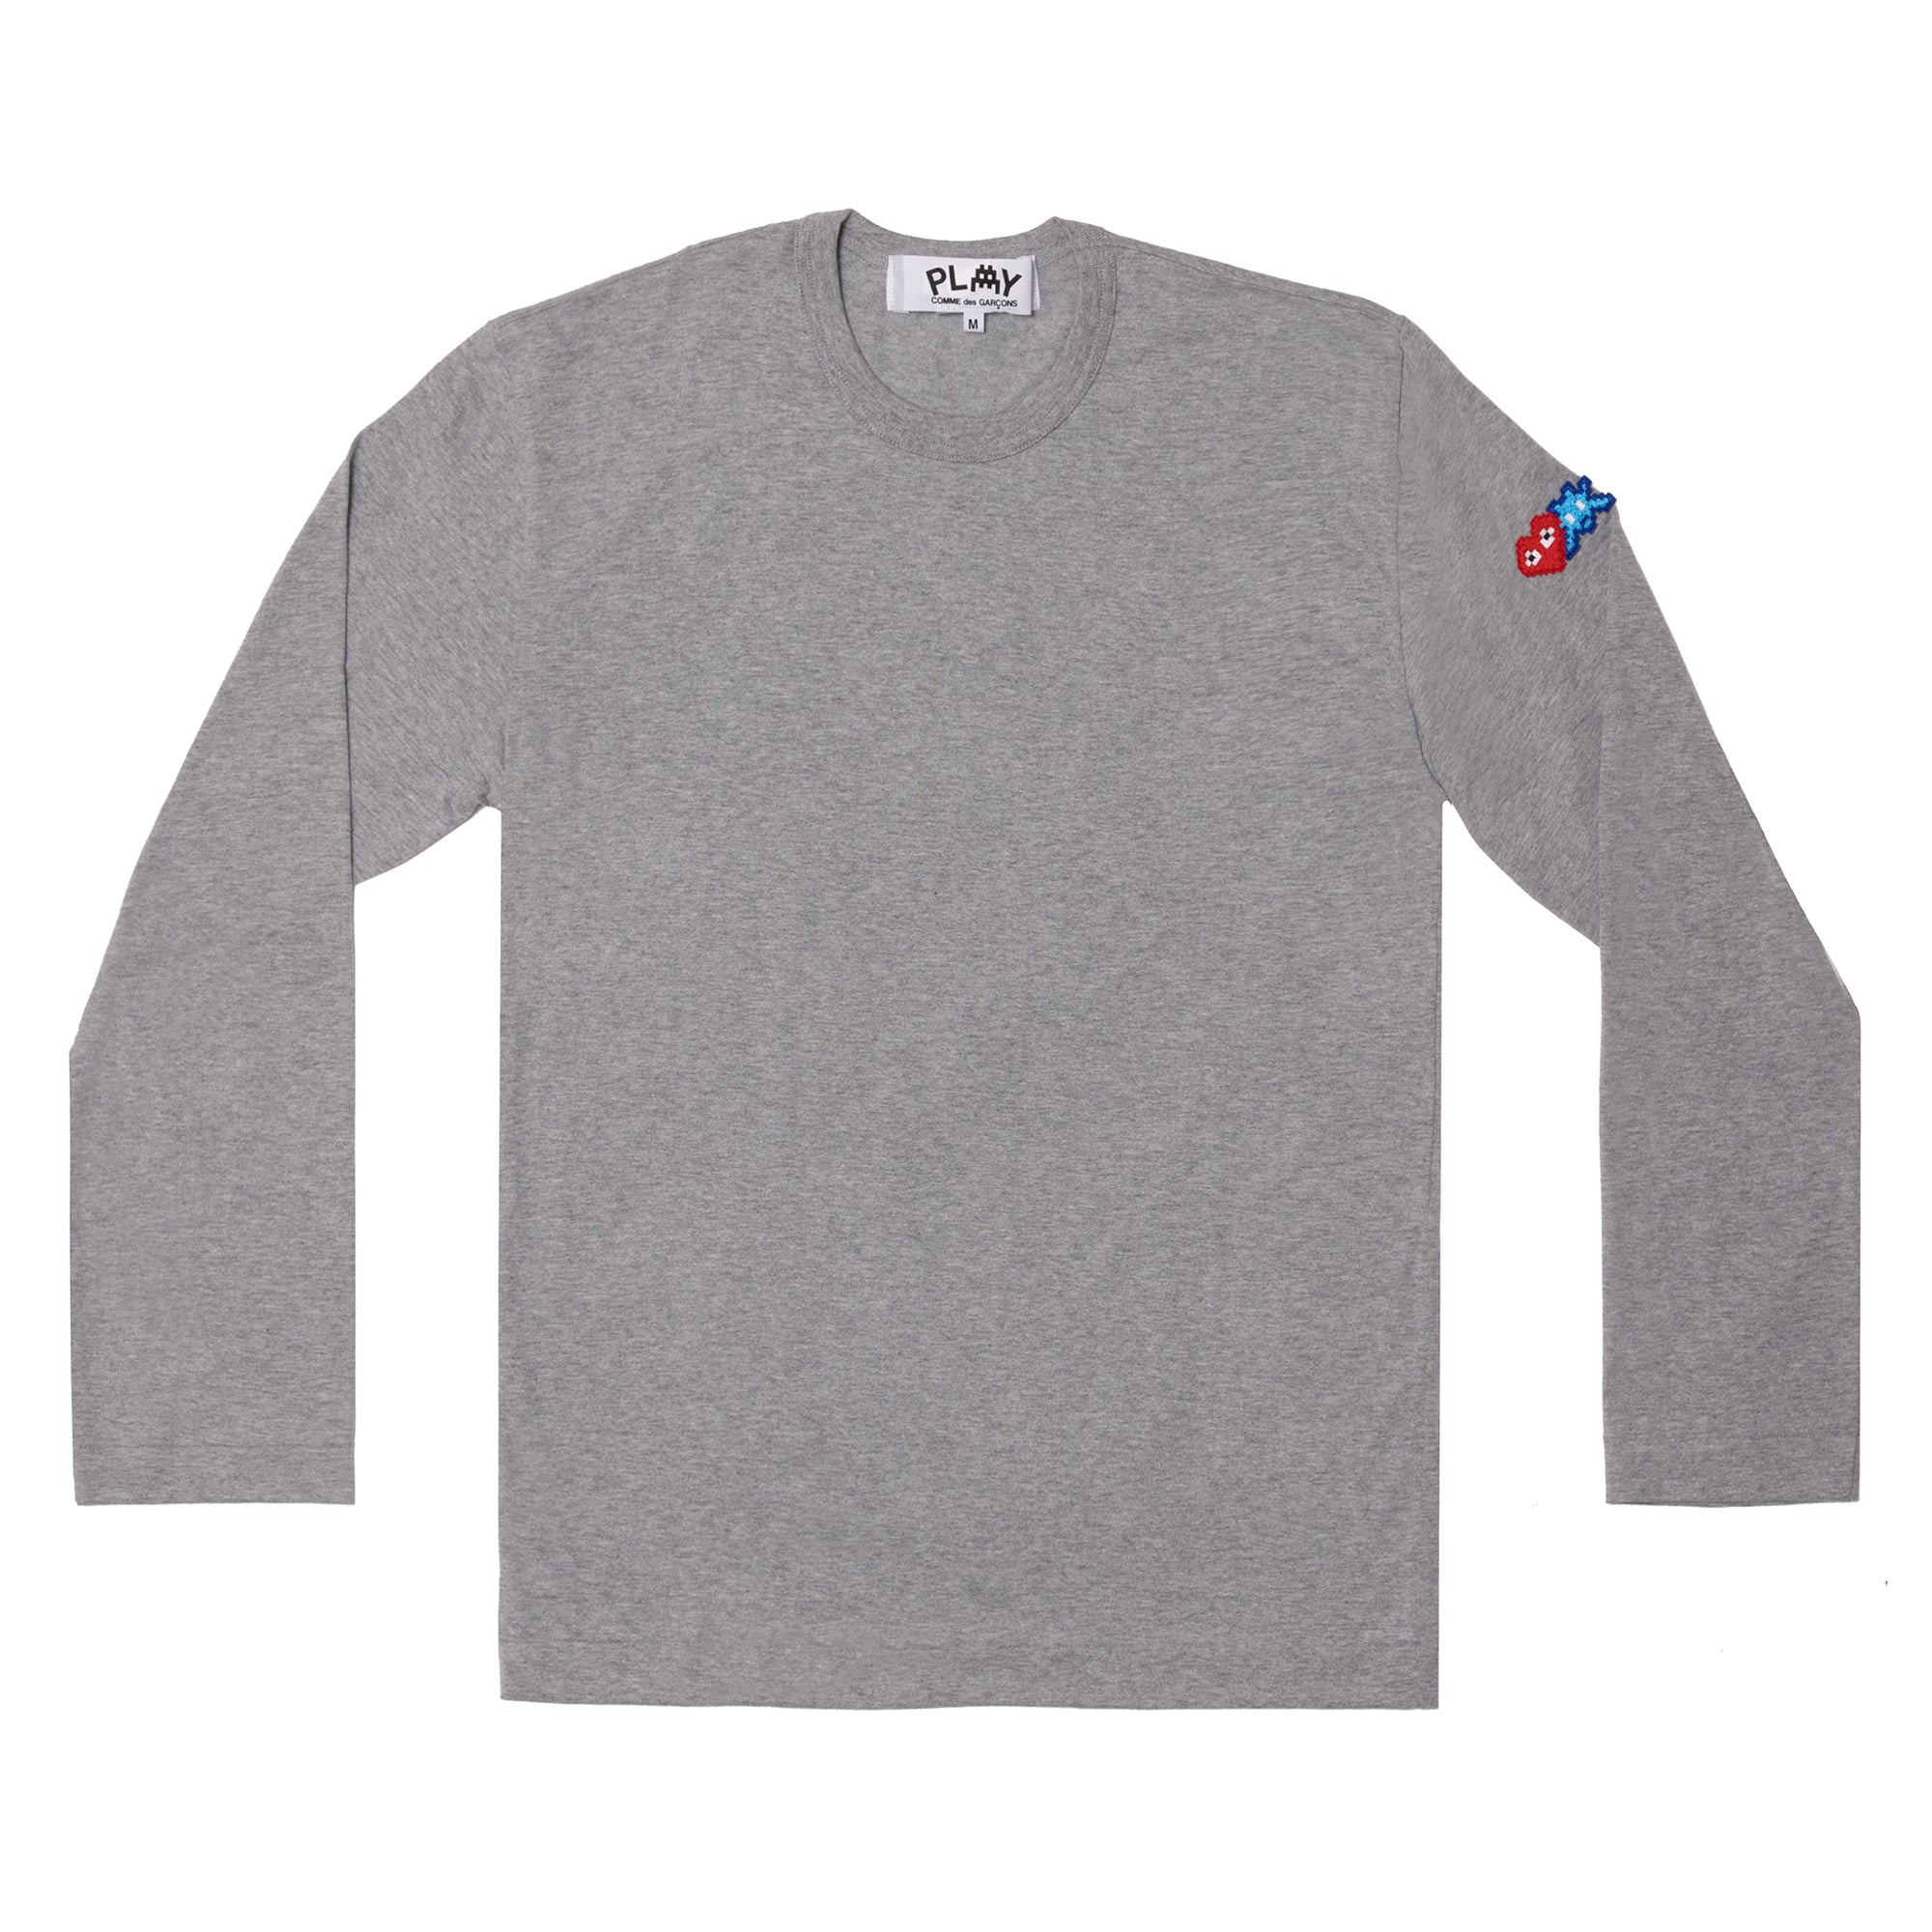 PLAY CDG - INVADER Cotton L/S T-Shirt - (Grey) view 1